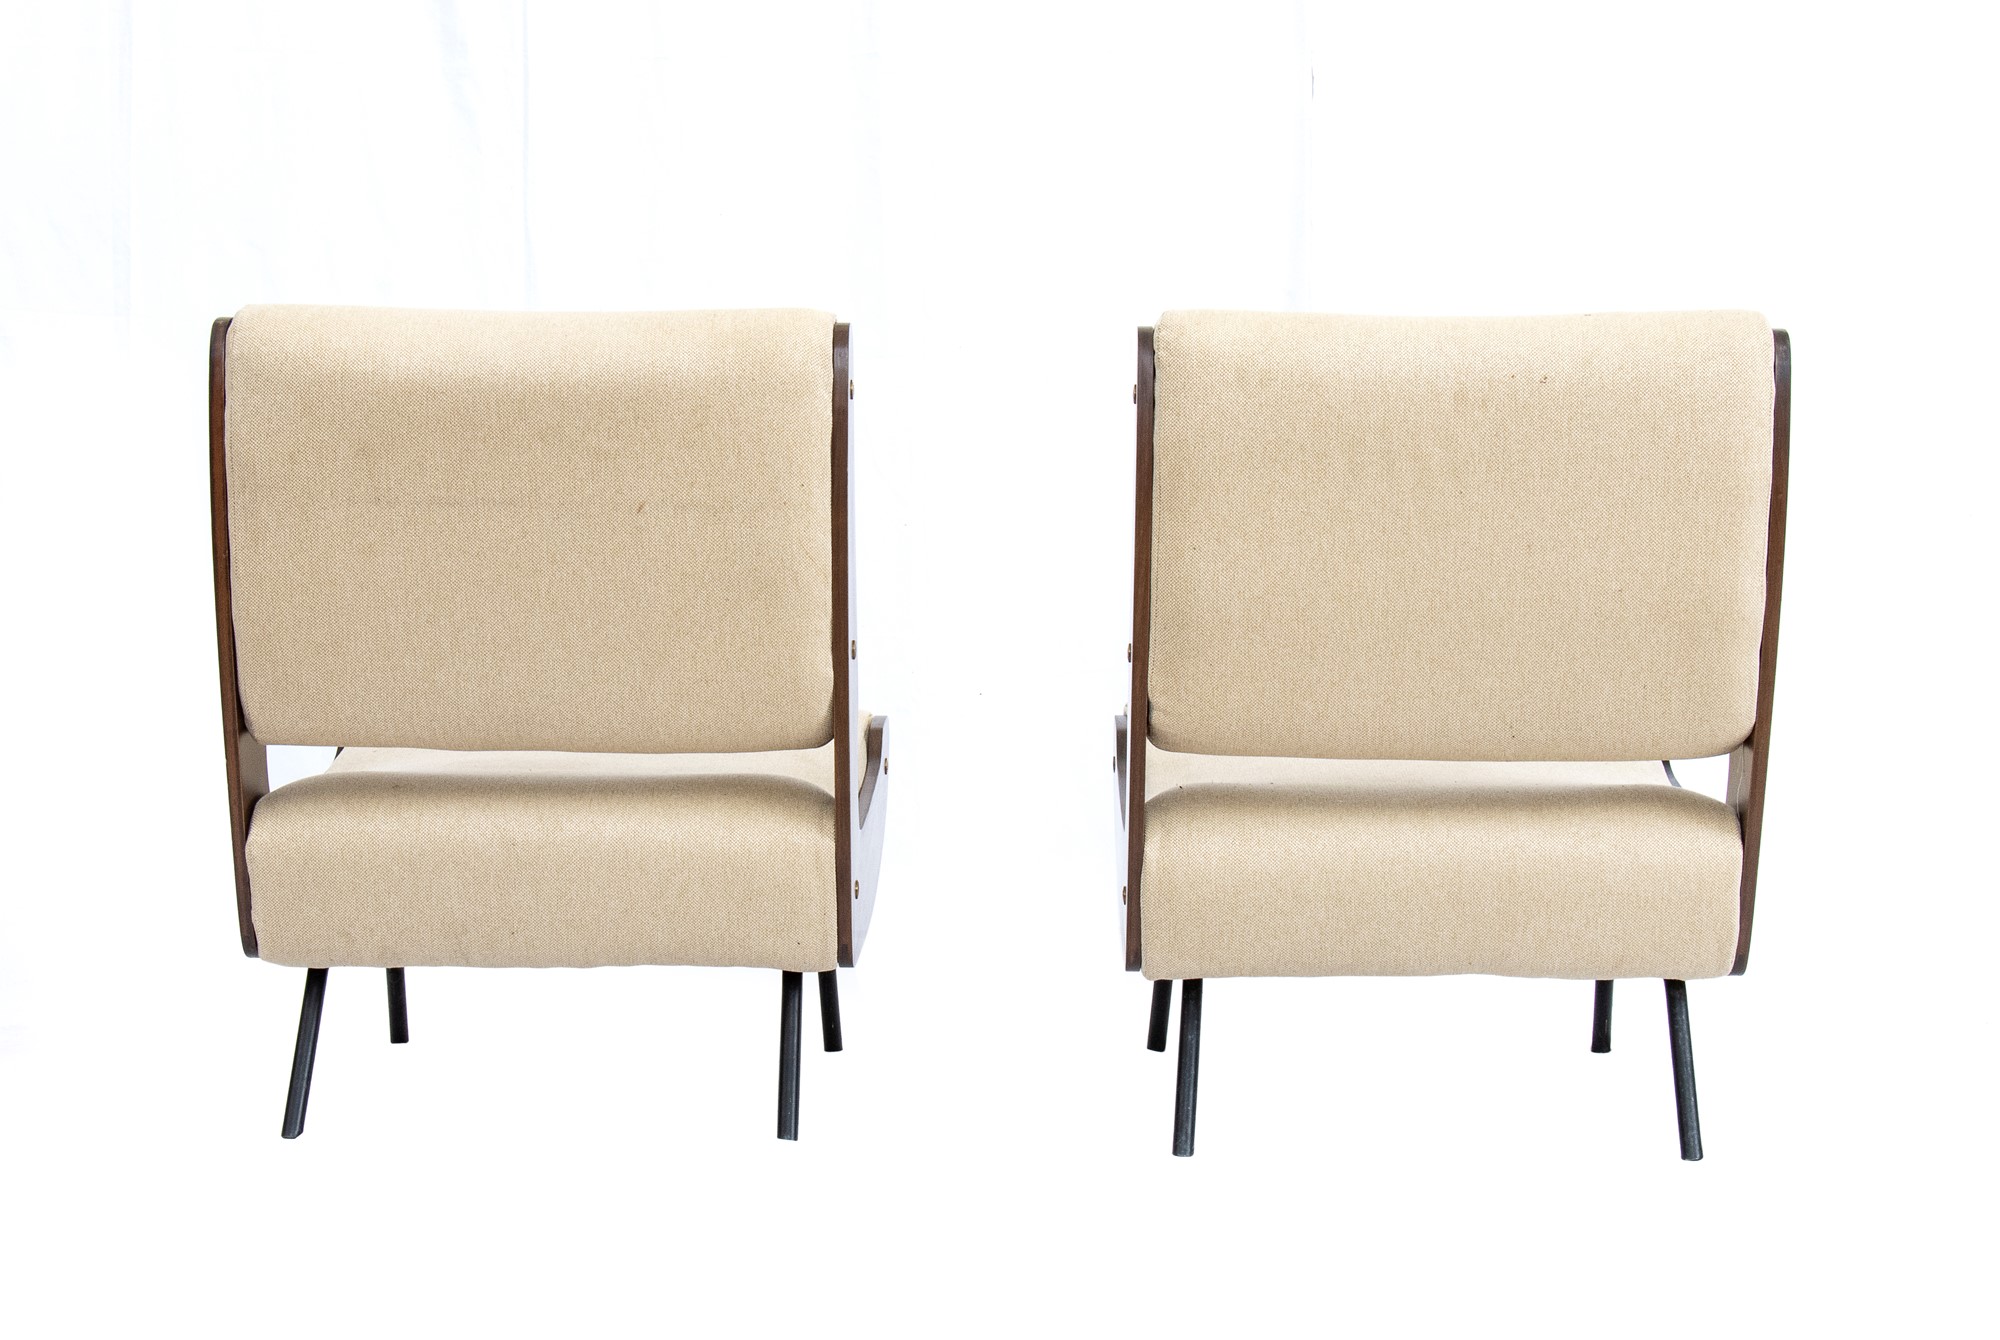 Gianfranco Frattini  Pair of armchairs mod. 863 with wooden and metal structure and brass details by - Image 18 of 19